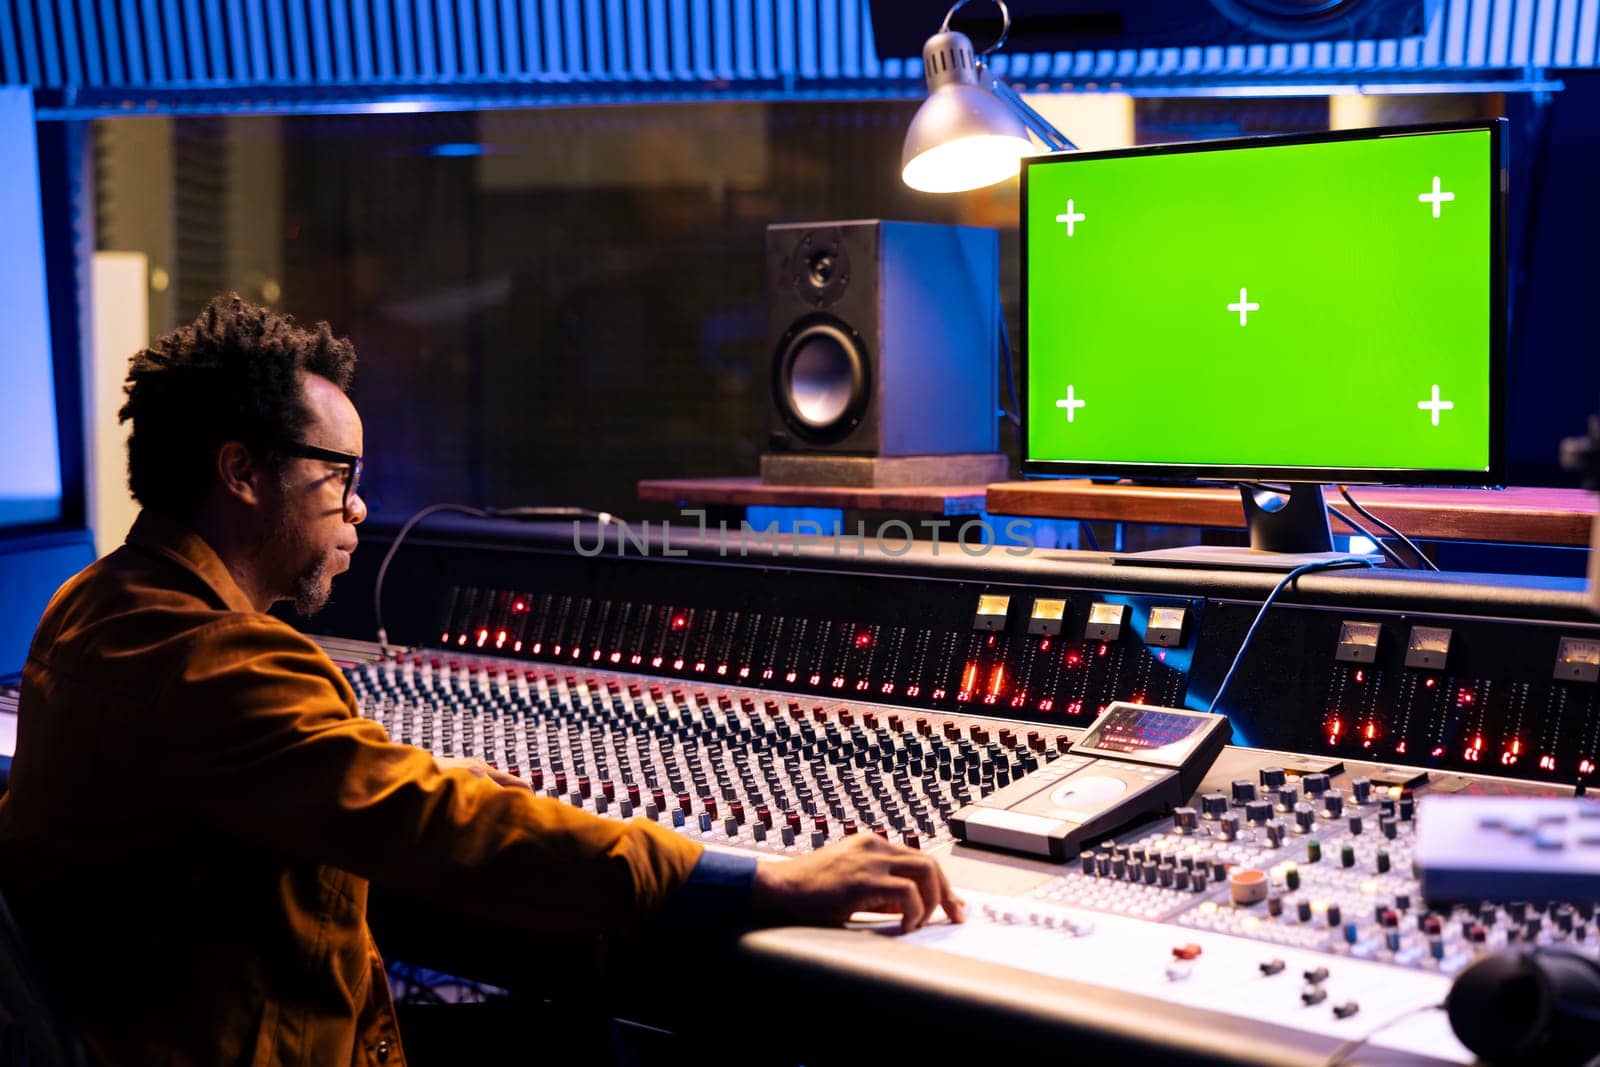 Sound designer operating mixing console and greenscreen monitor by DCStudio